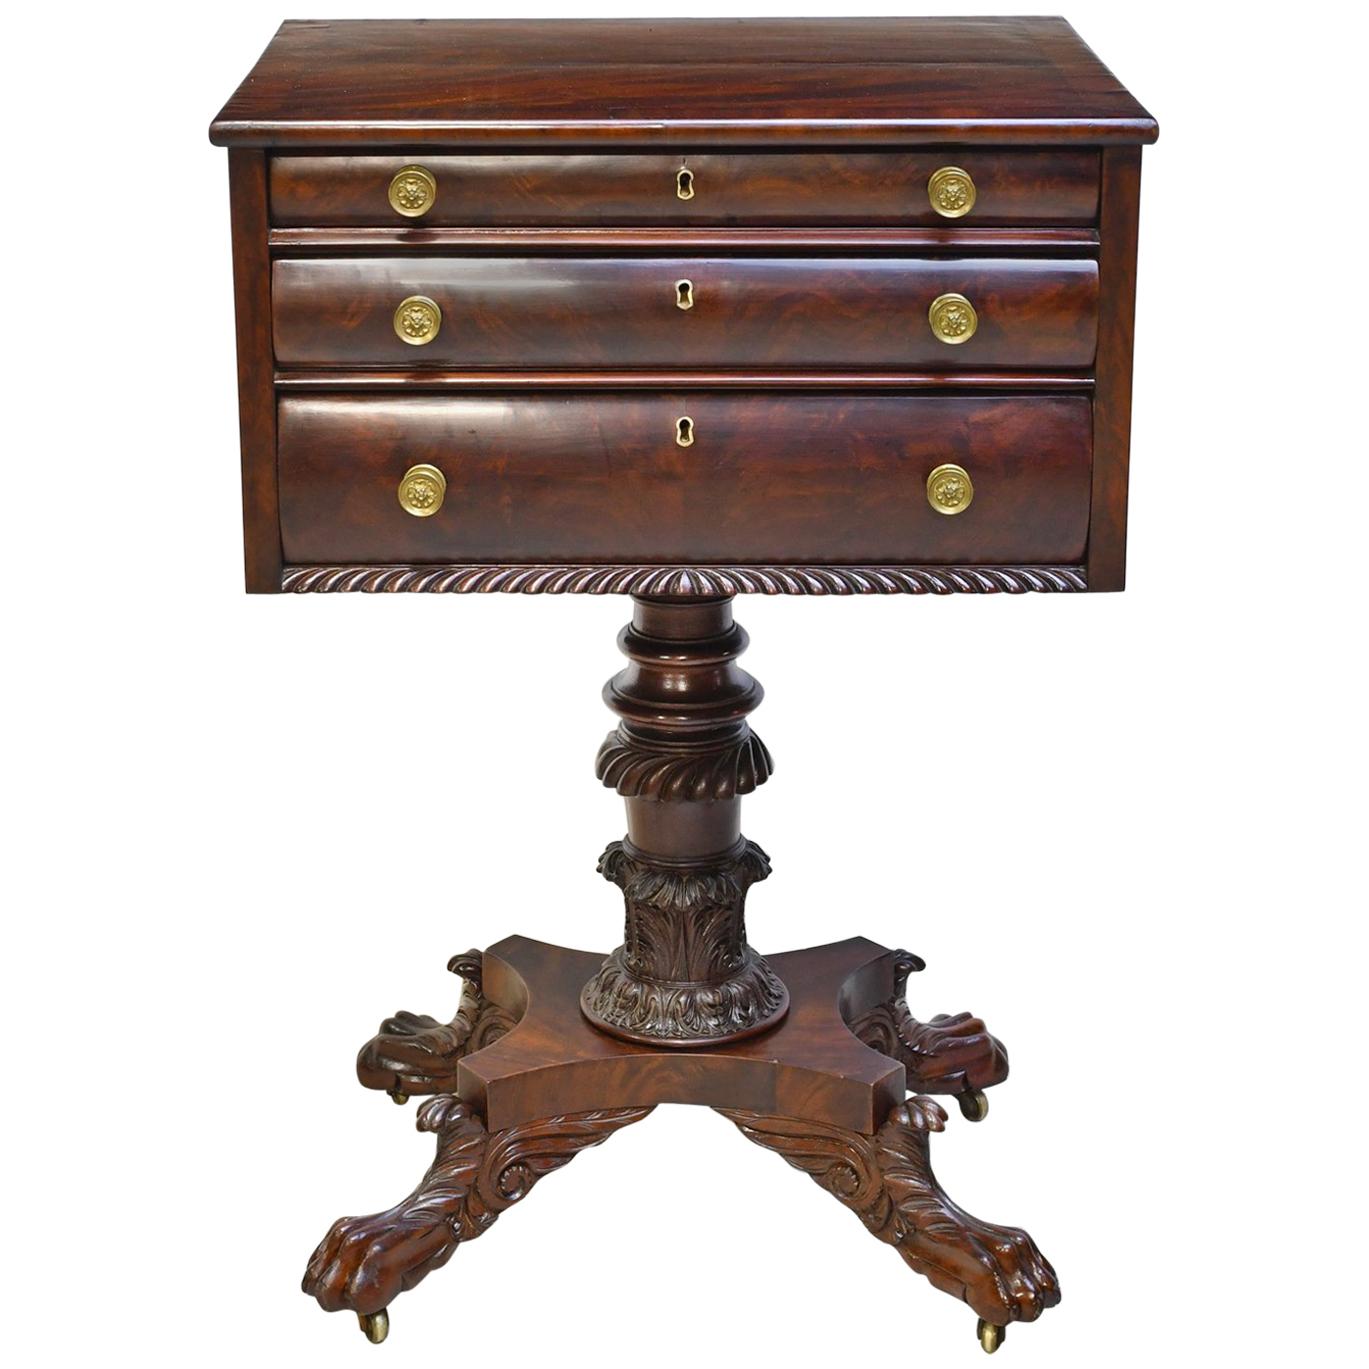 Philadelphia Federal Work or End Table in Mahogany, circa 1820